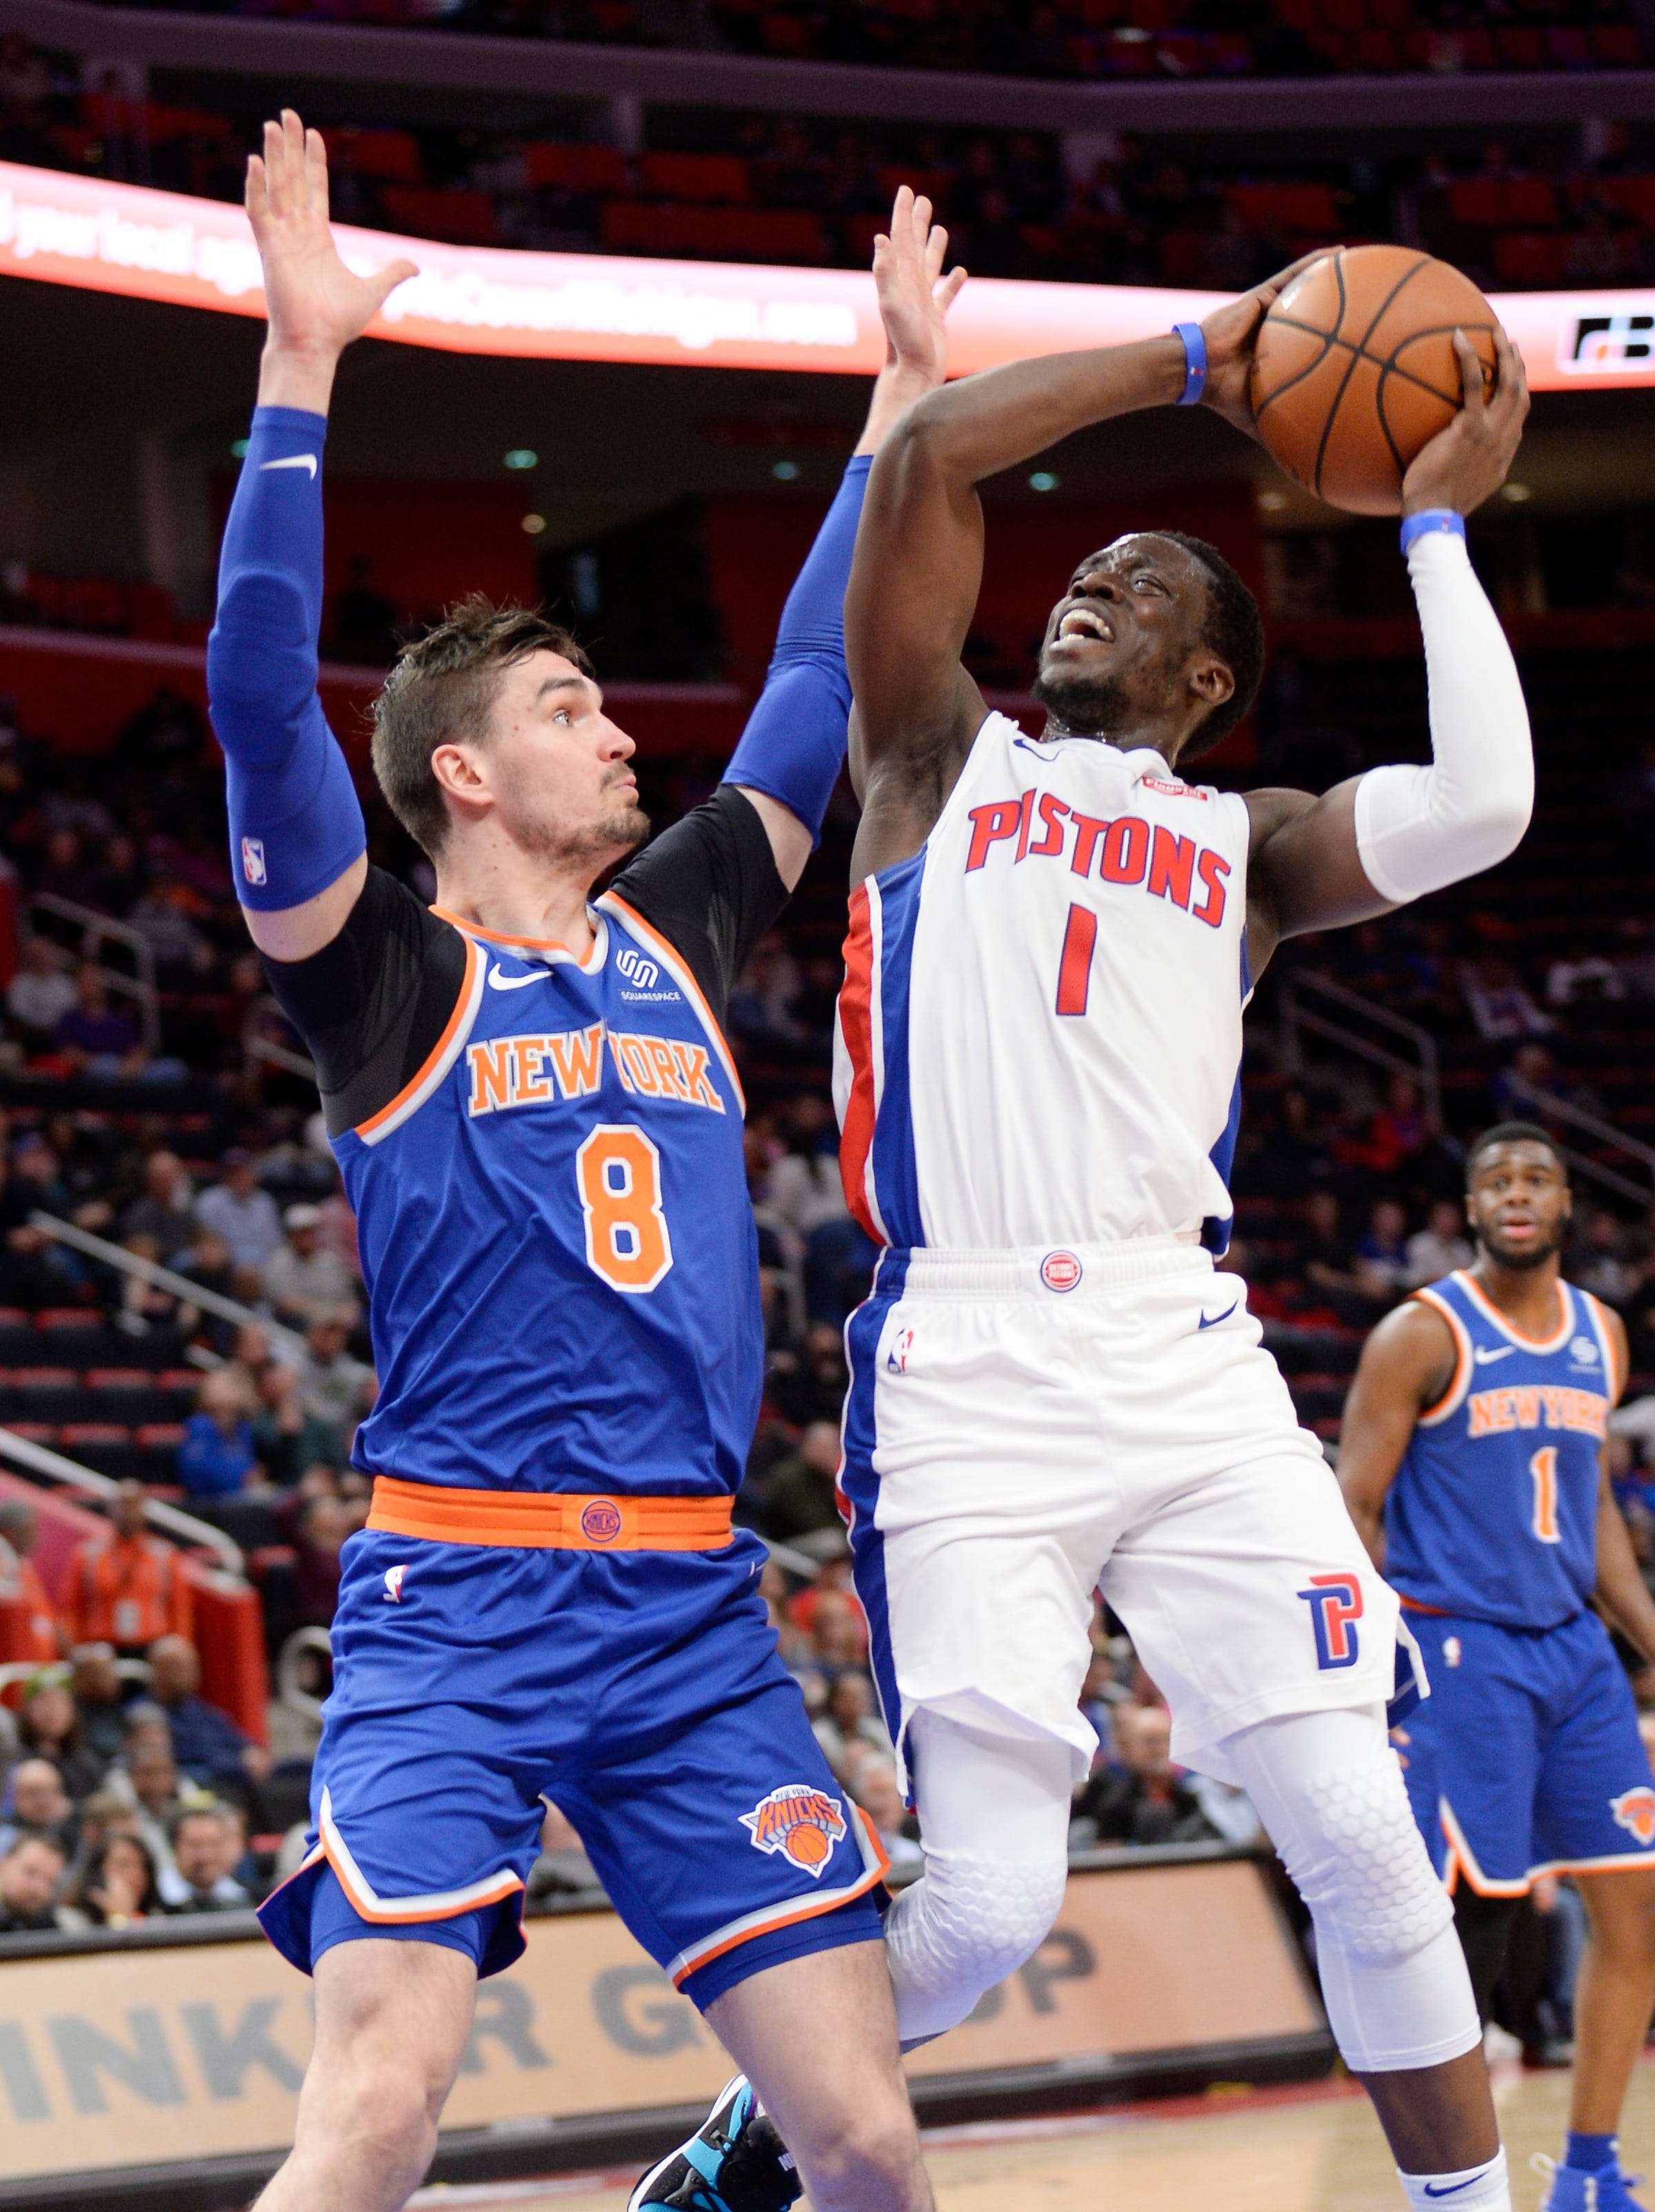 Pistons ' Reggie Jackson shoots over Knicks ' Mario Hezonja in the second quarter. Jackson had 21 points and four assists.